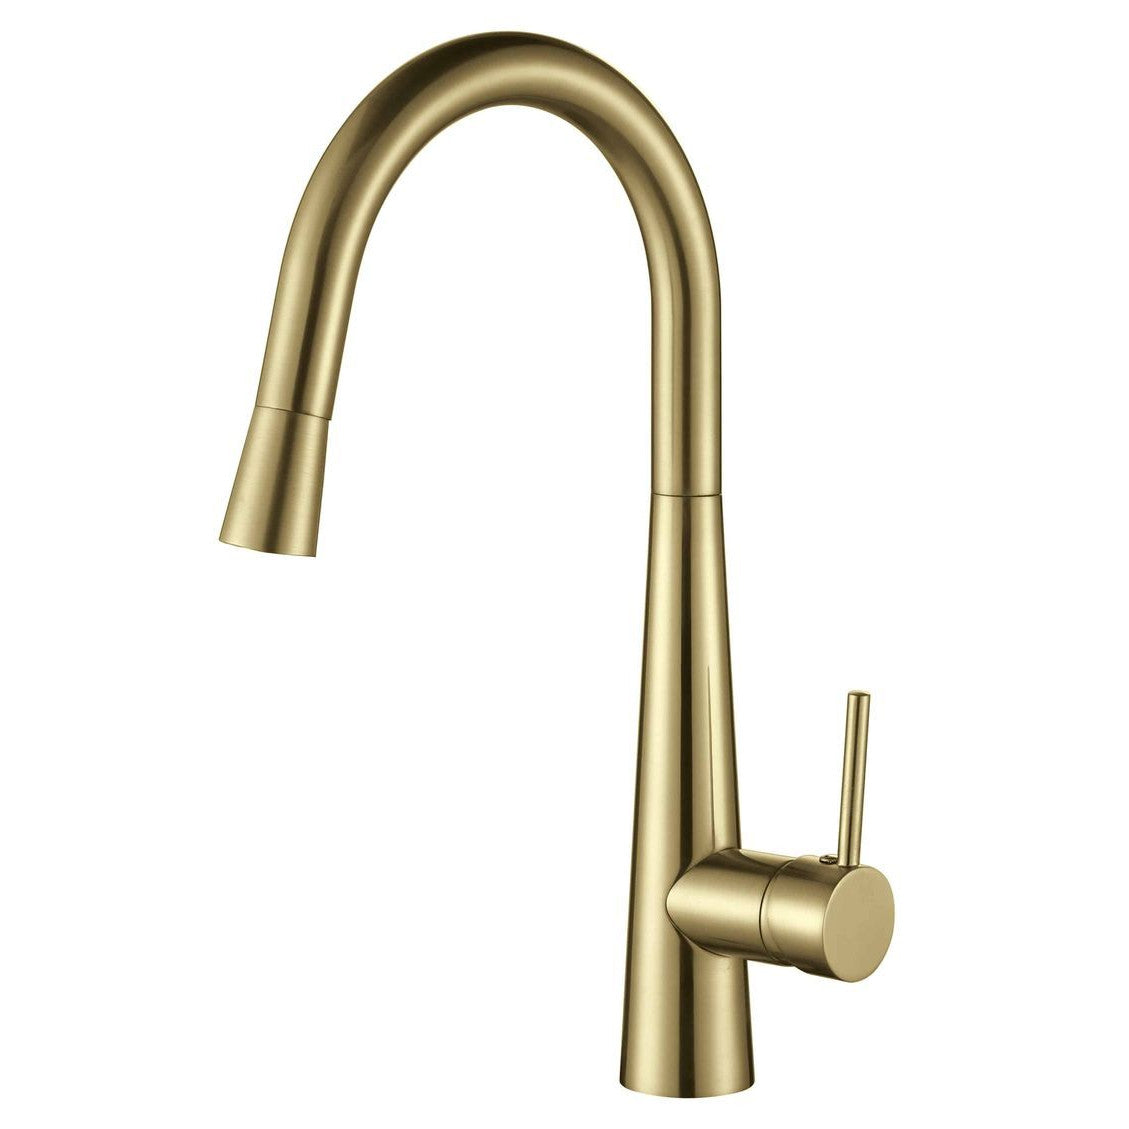 ECT Global Jess Pull Out Sink Mixer